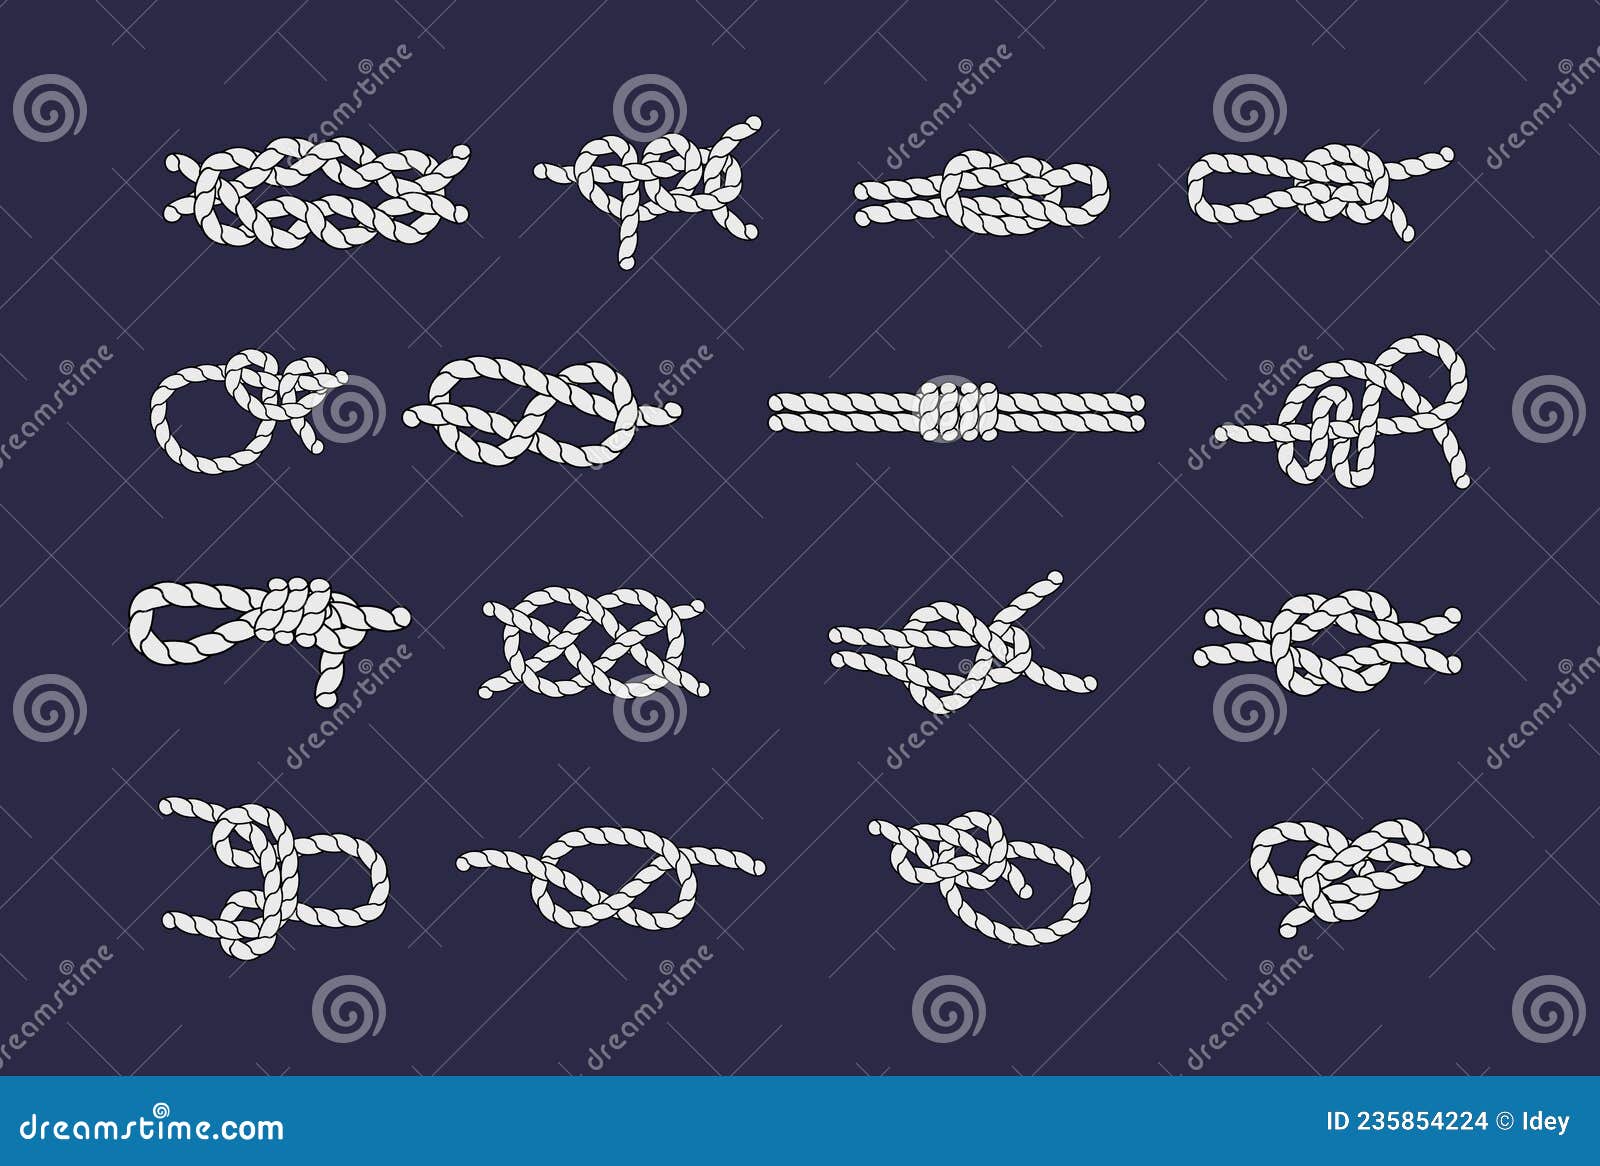 Sea Rope Knots and Loops Set. Marine Rope and Sailors Ship Knot, Cord  Sailor Borders, Knot Sail, Package Rope, Looped String, Stock Vector -  Illustration of package, knottings: 235854224